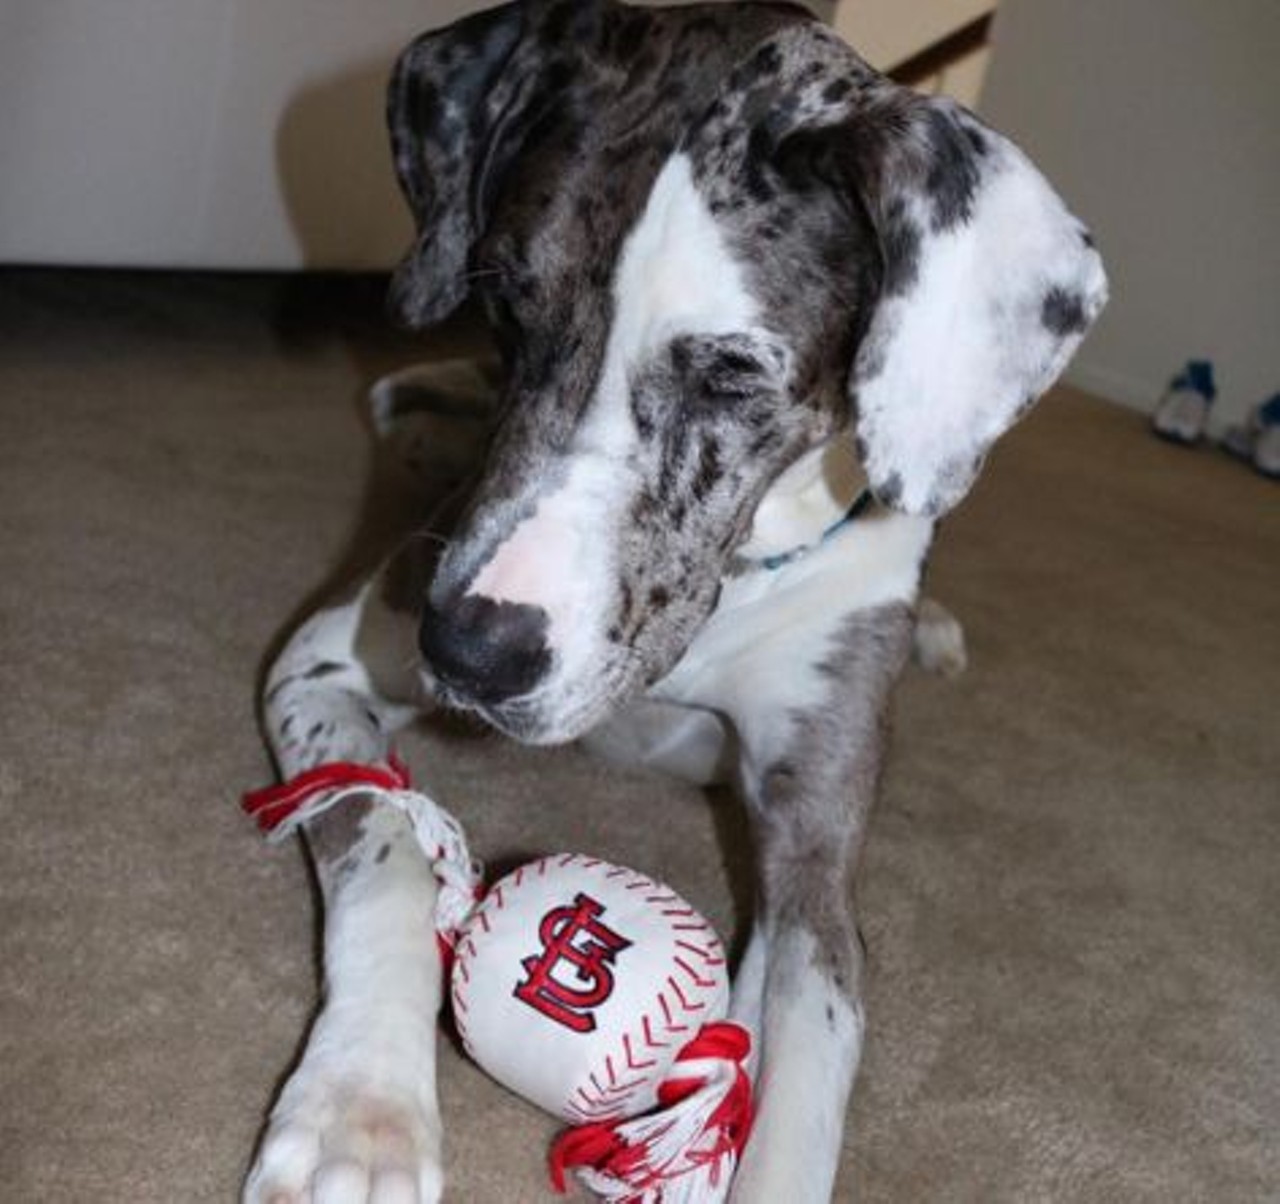 Somebody is ready to play ball. Photo courtesy of Instagram / greatdanezeus.